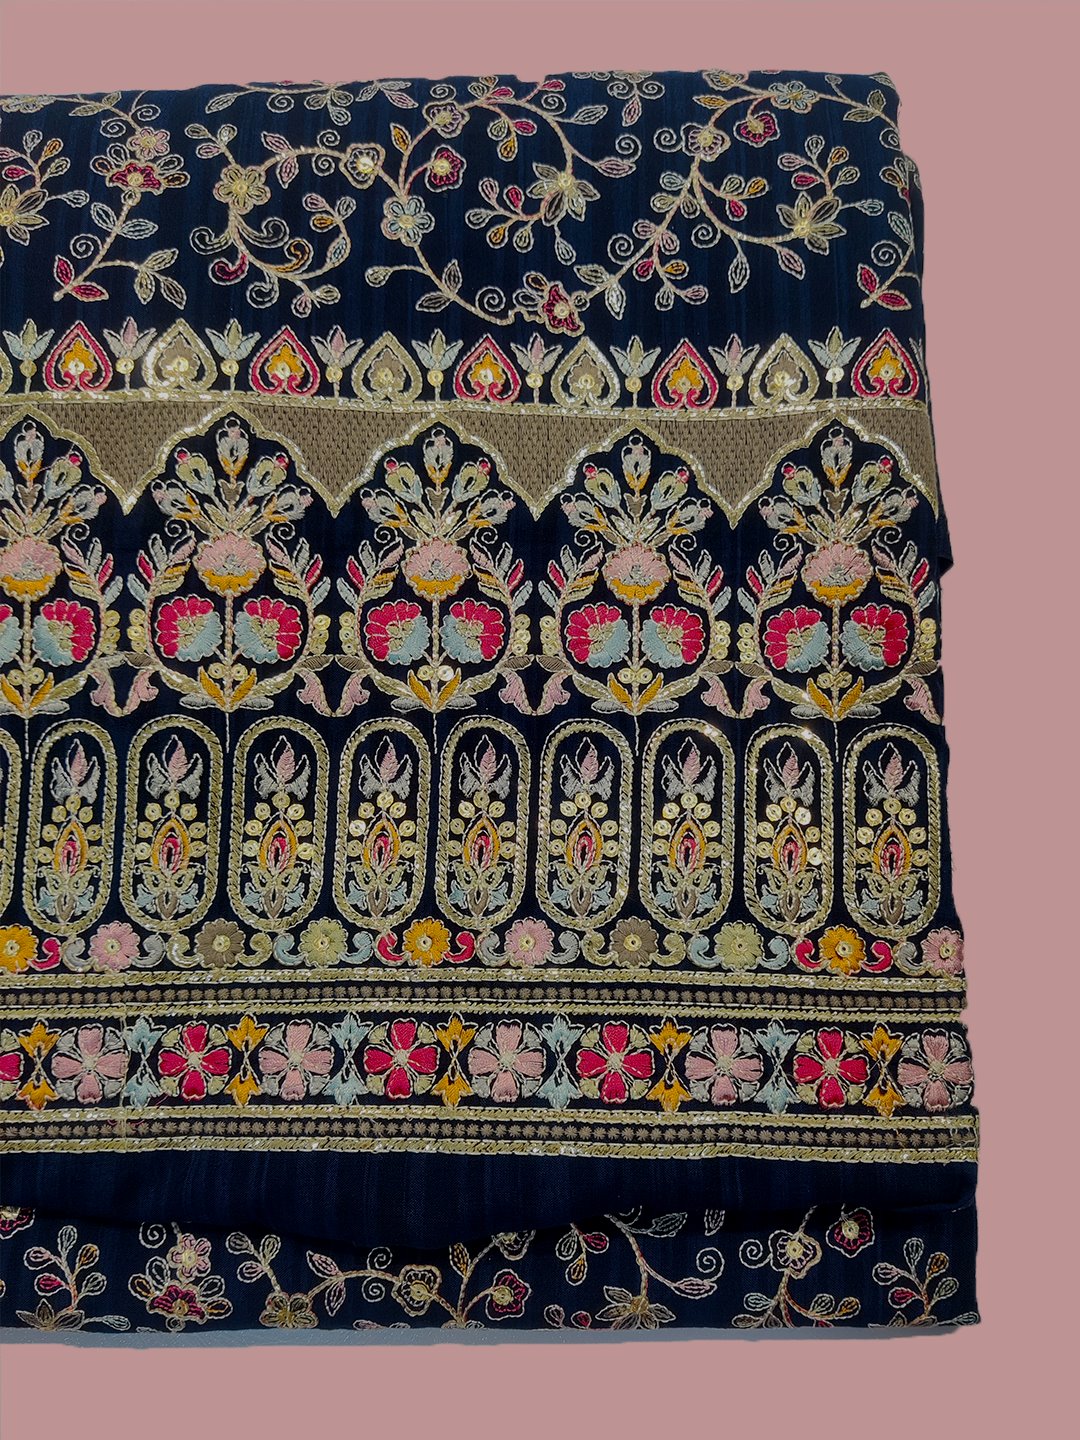 Embroidered Daman Fabrics, Designer Embroidery fabric Material